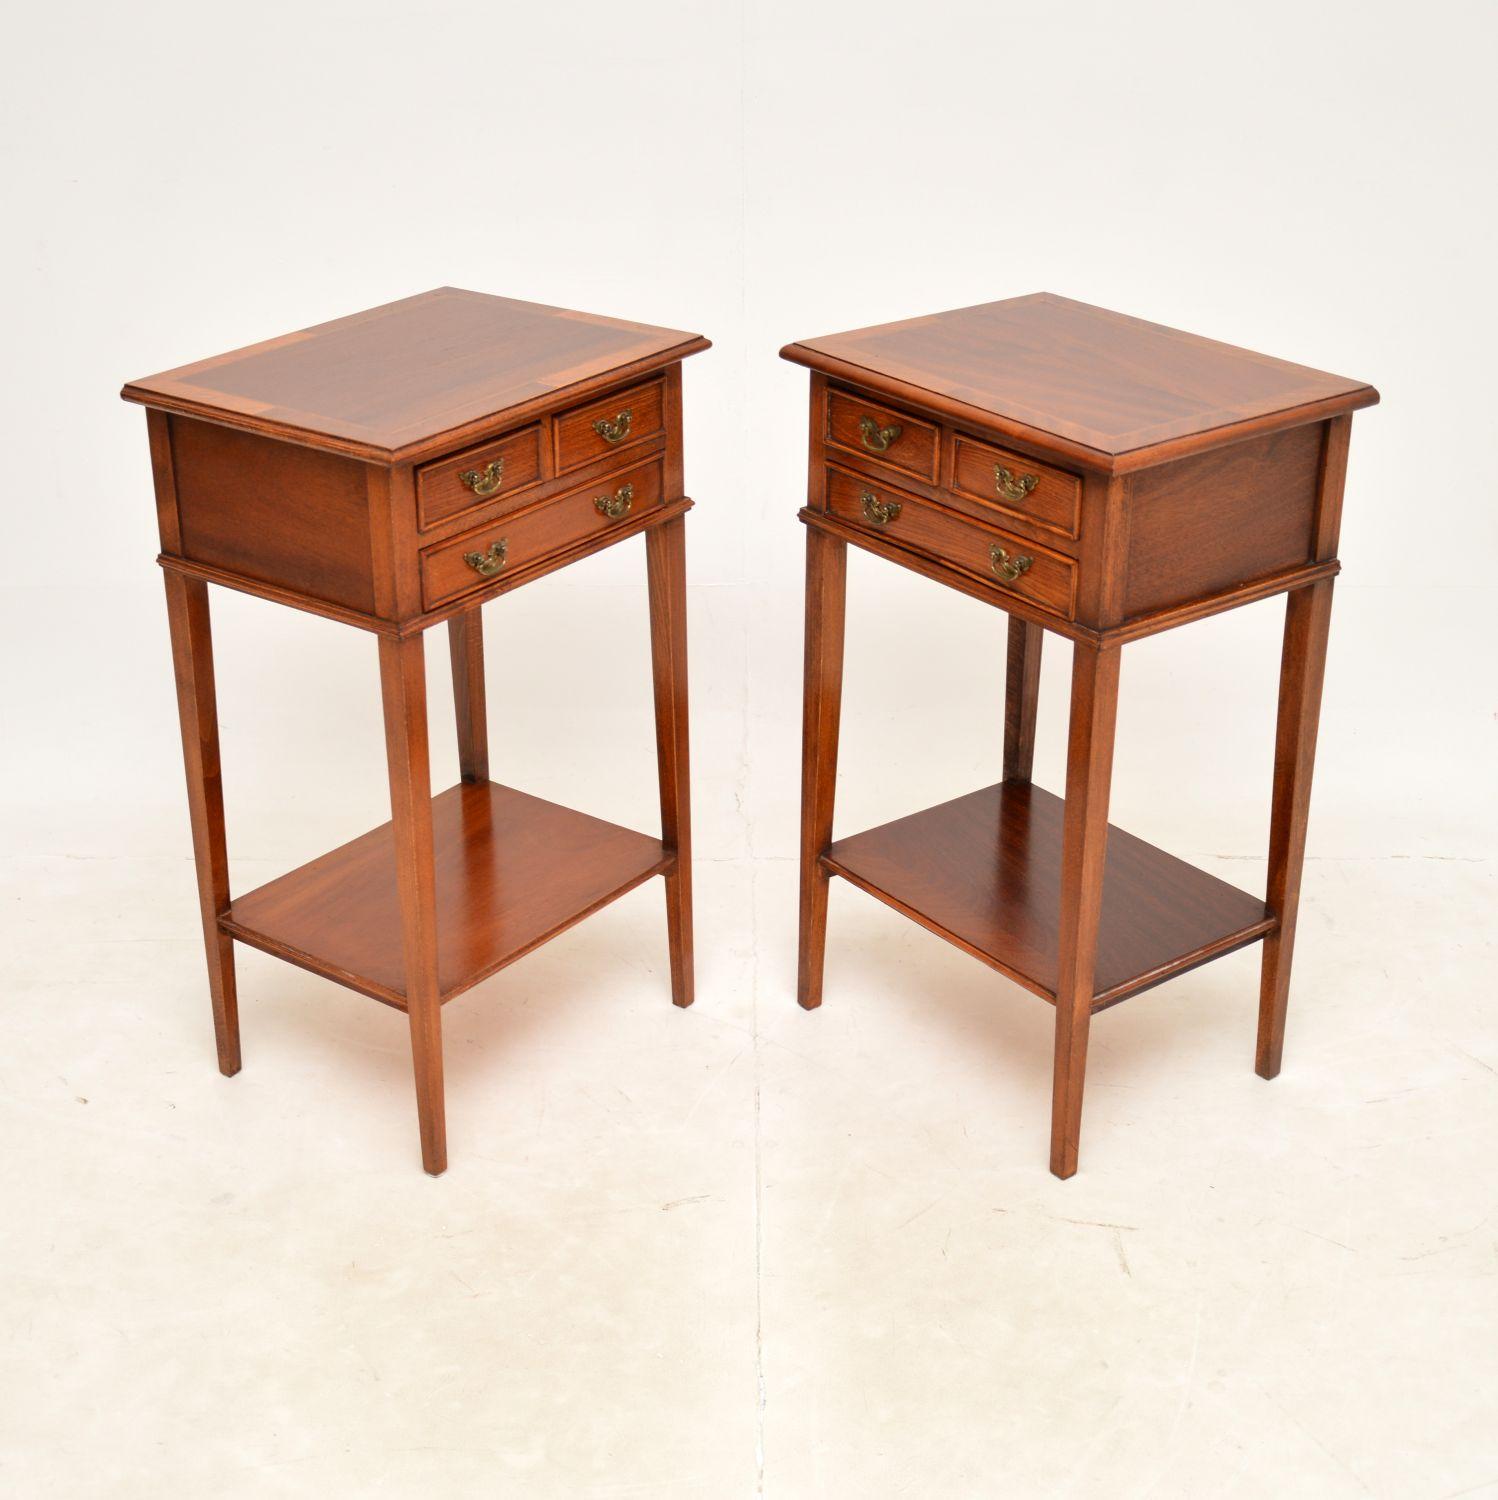 British Pair of Antique Georgian Style Side Tables